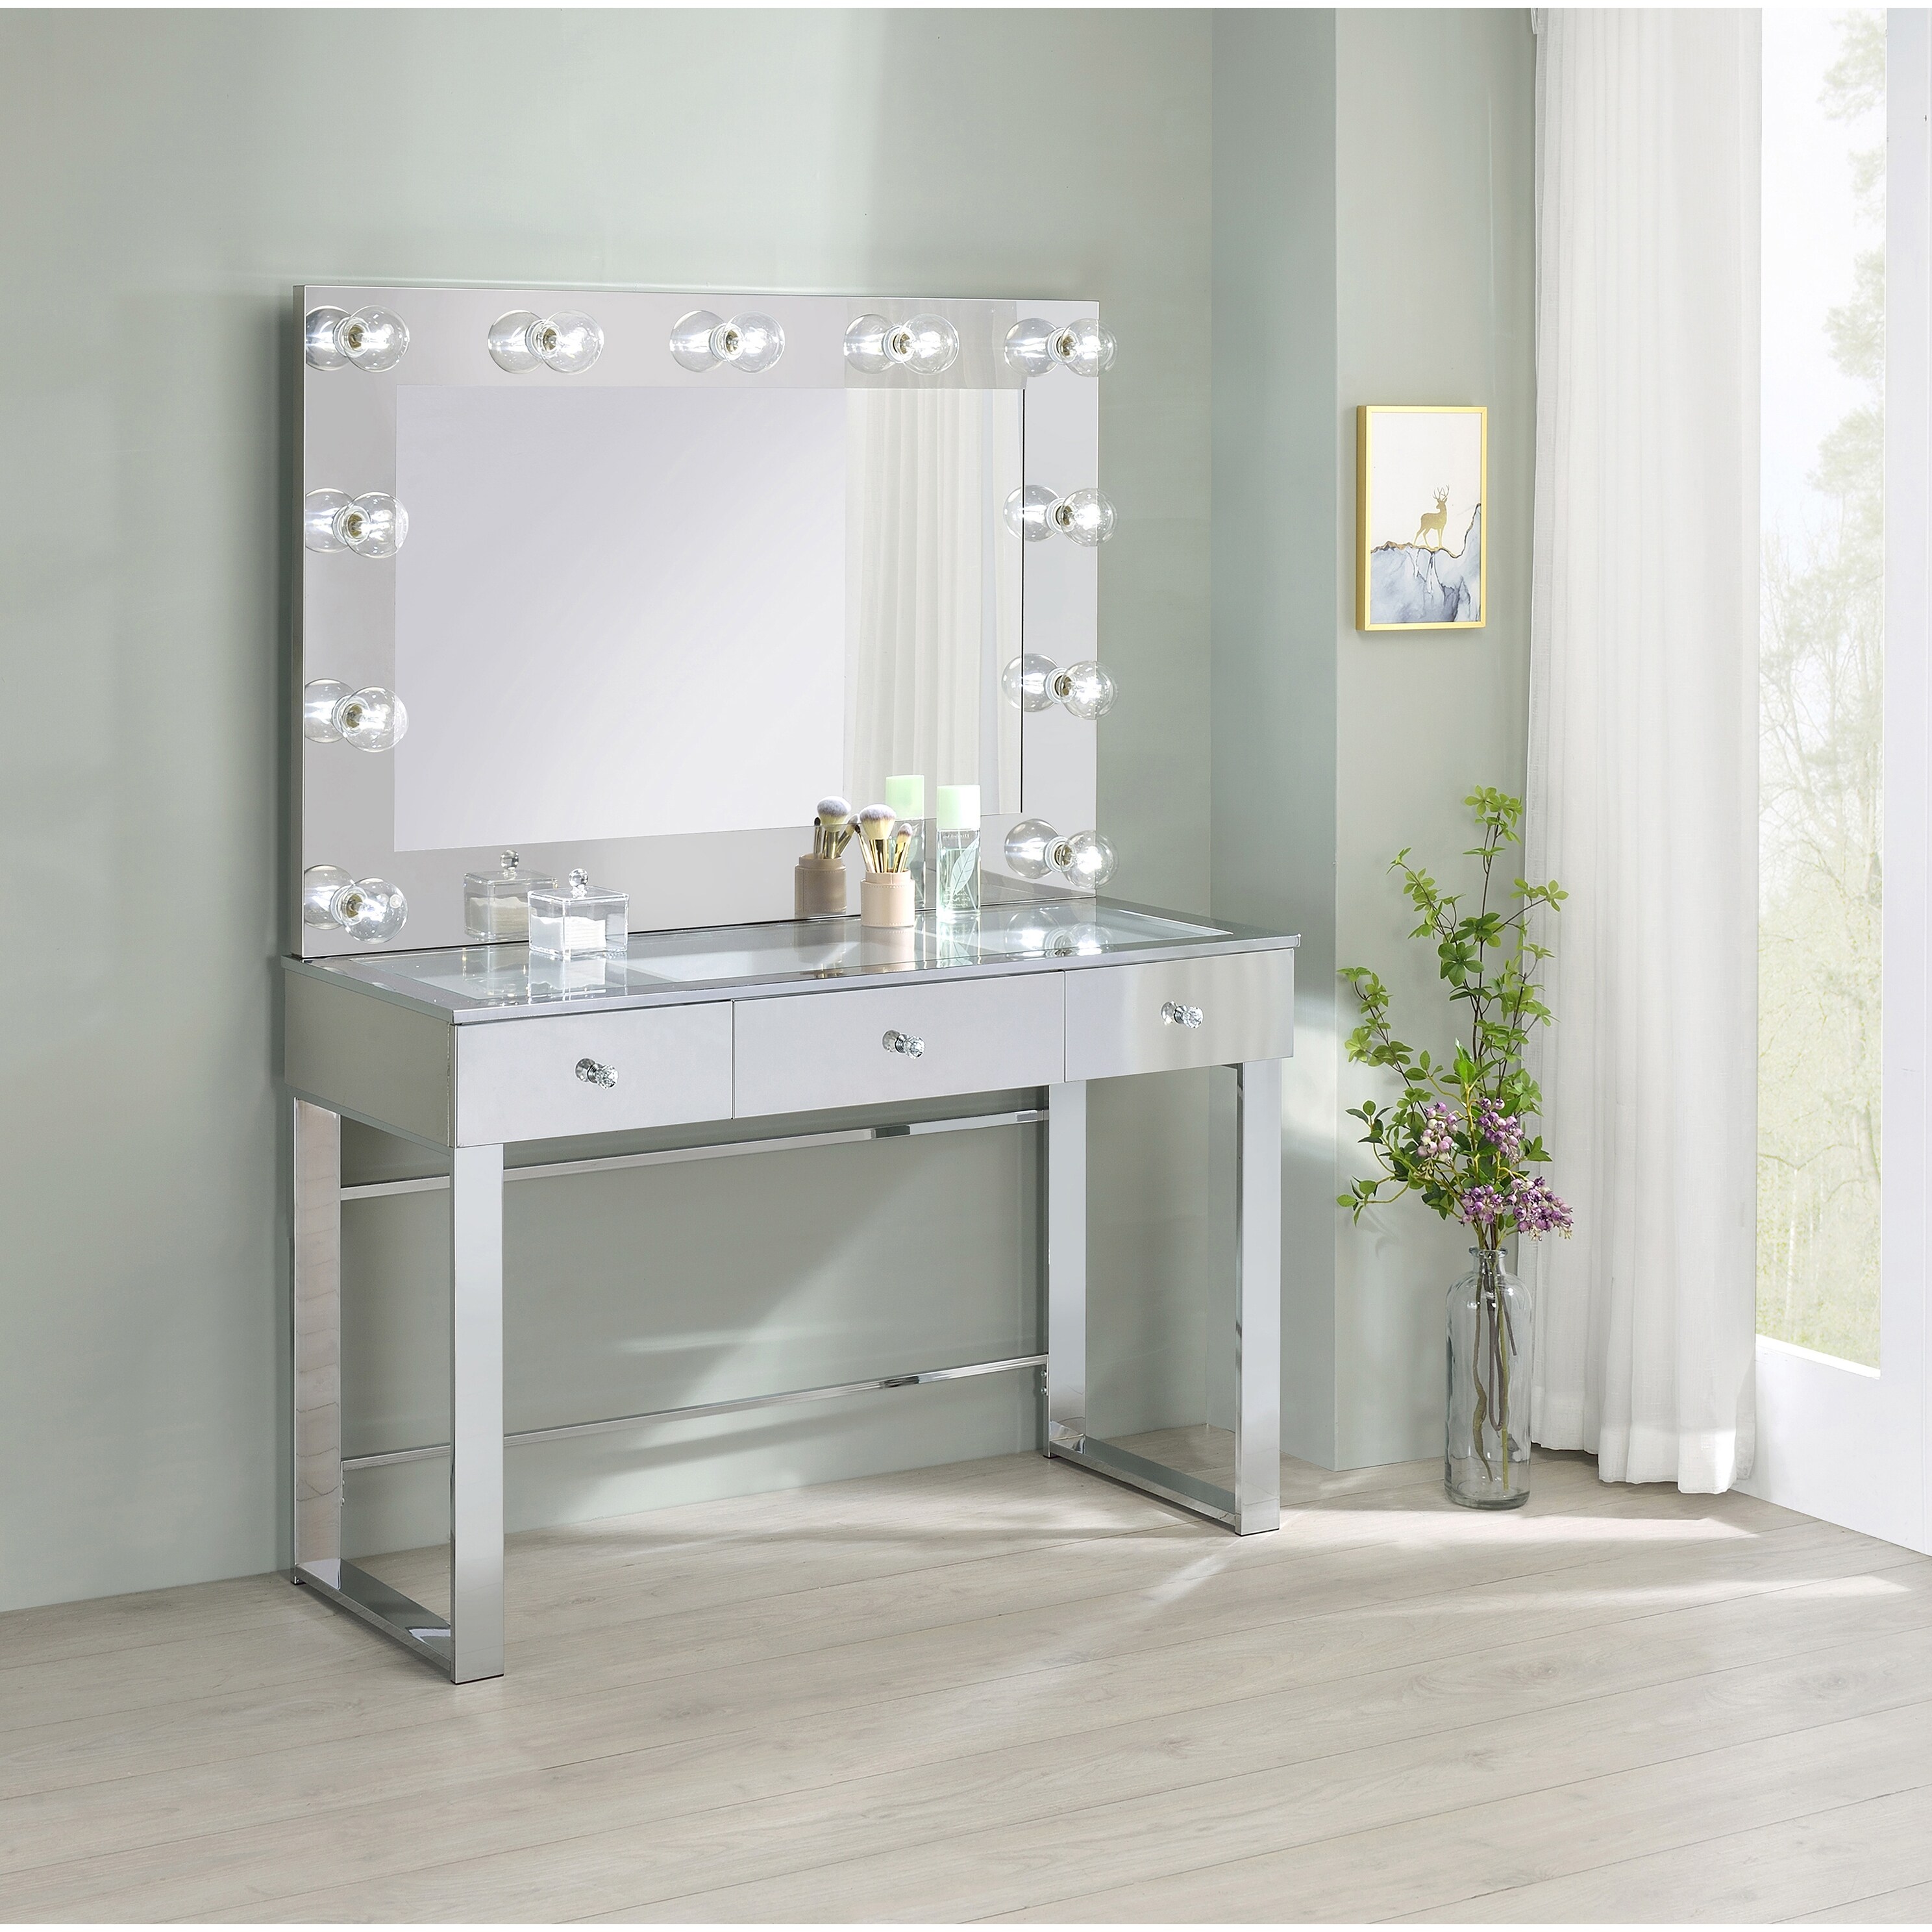 https://ak1.ostkcdn.com/images/products/is/images/direct/254e36e7d10dea21e6e4c0acc6c825ccec67035a/Chrome-and-White-3-drawer-Vanity-Desk-with-Lighting.jpg